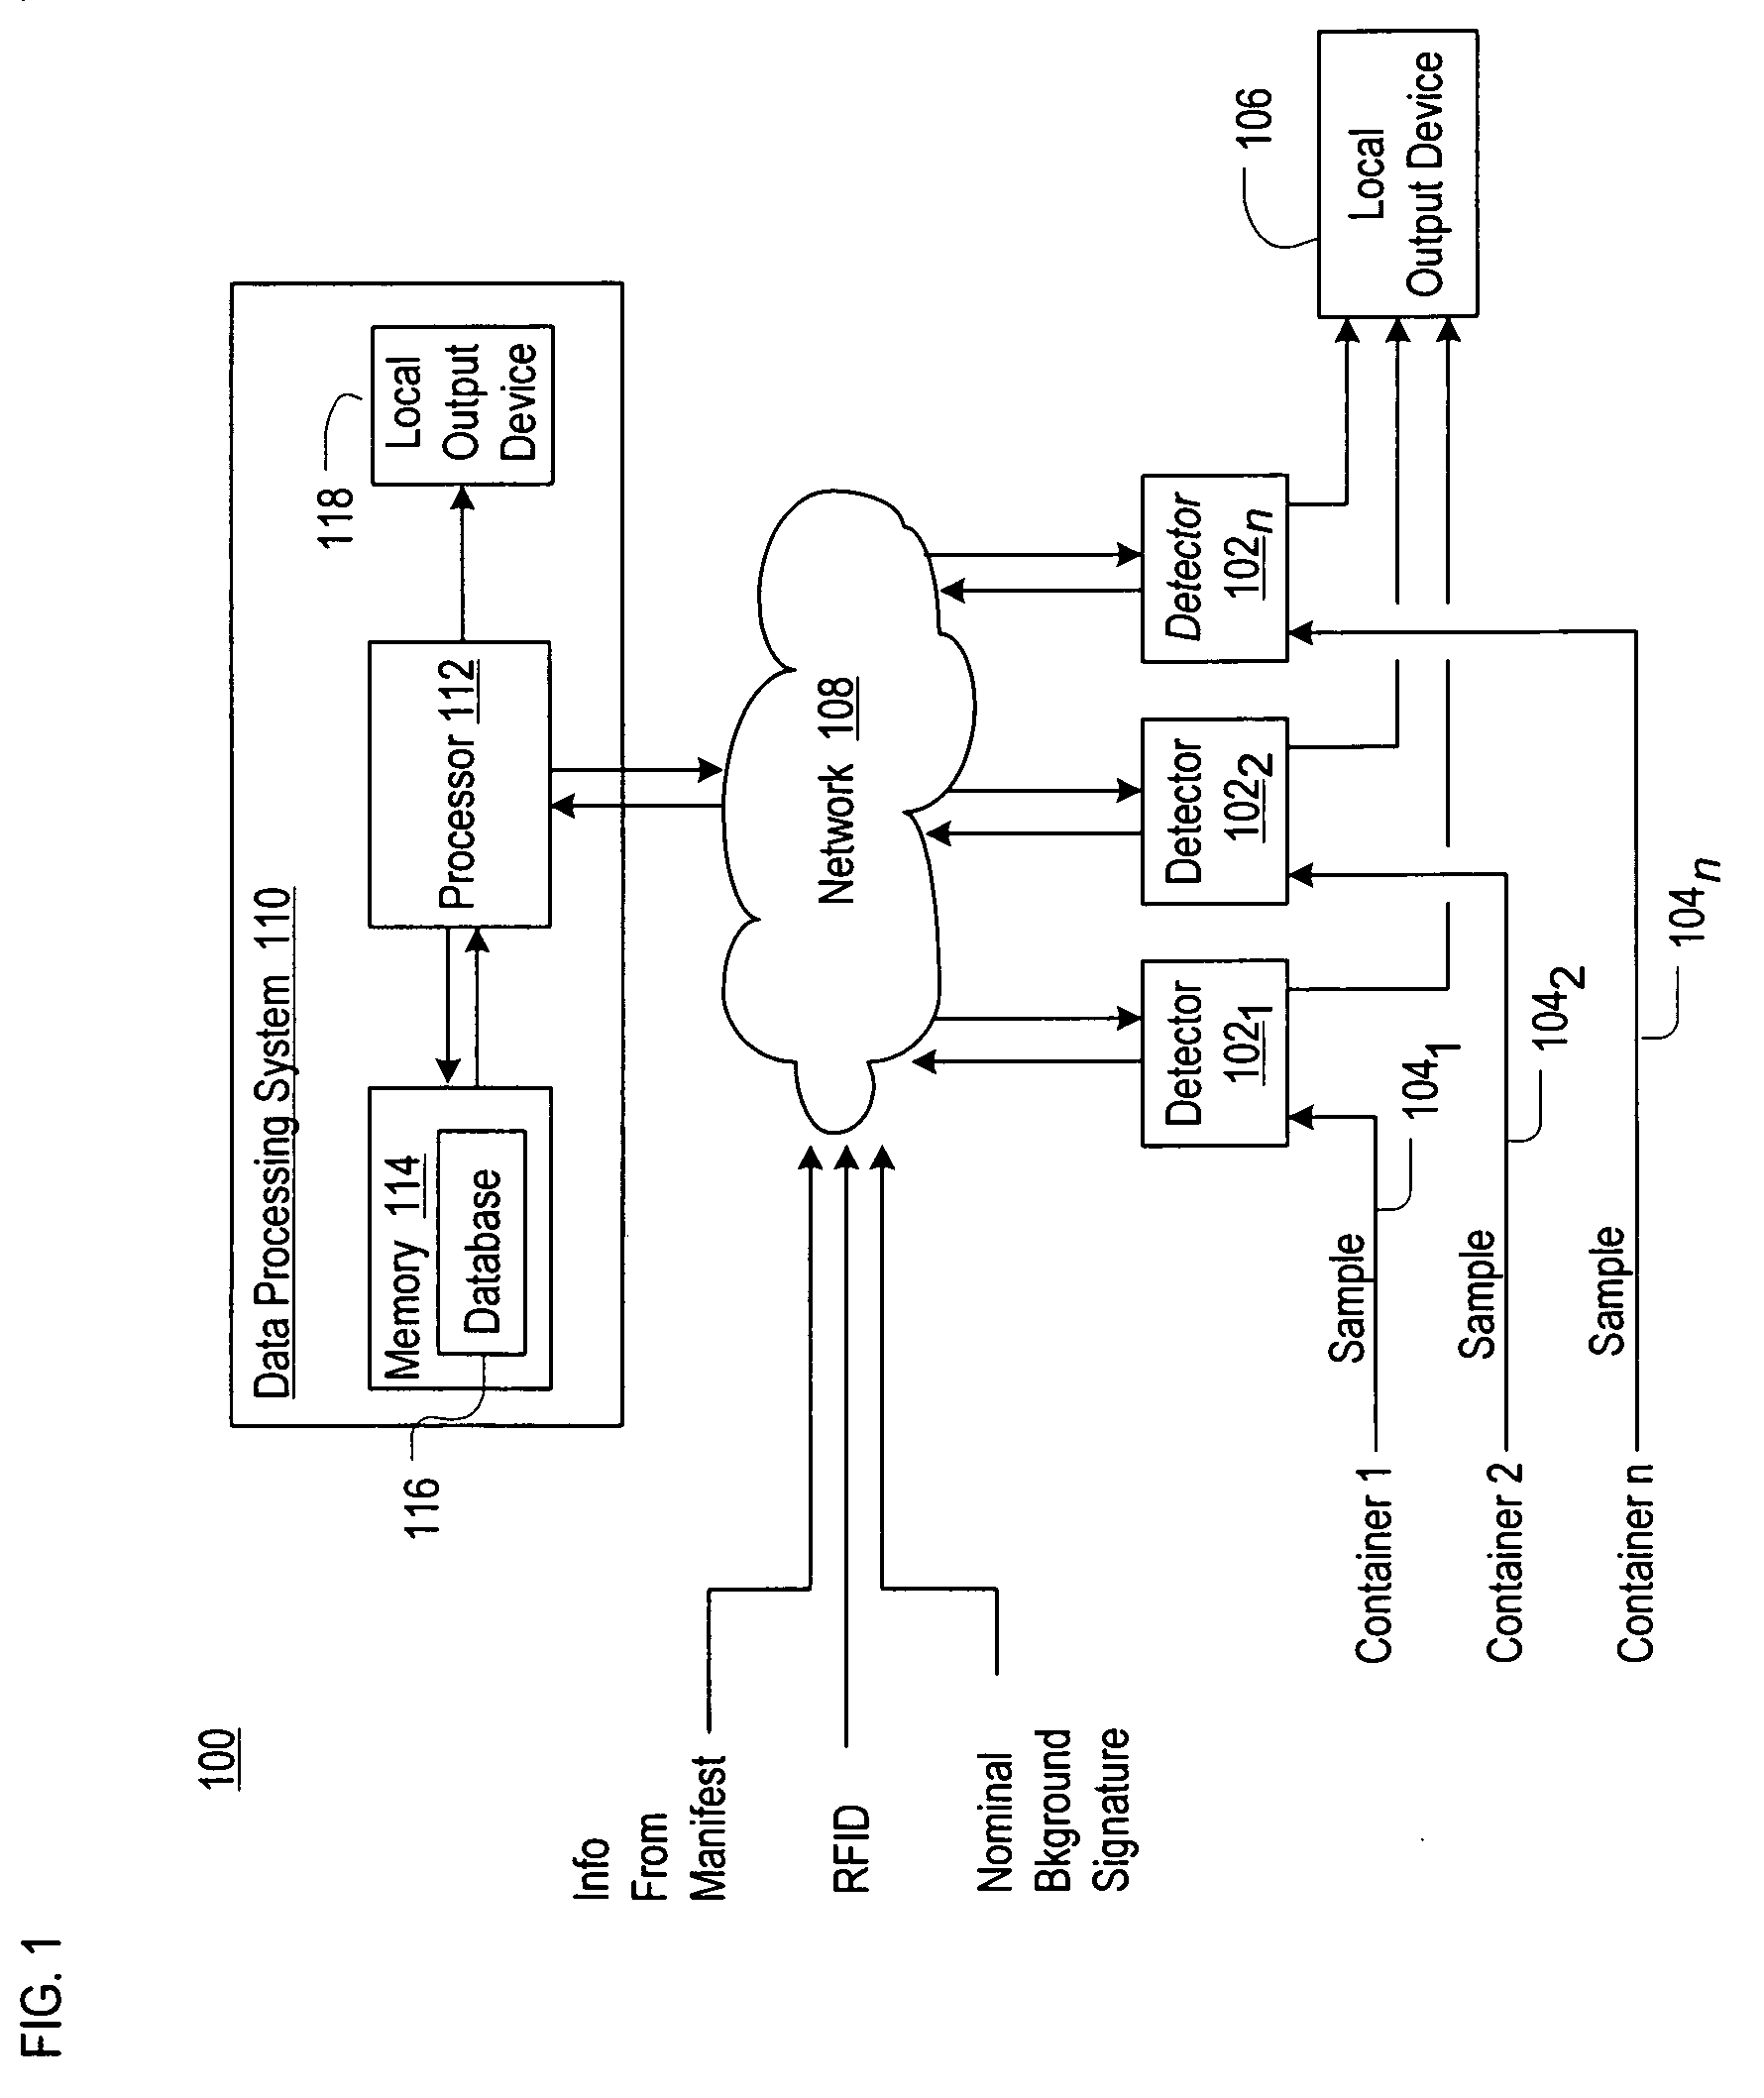 System and Method for Inter-modal Container Screening